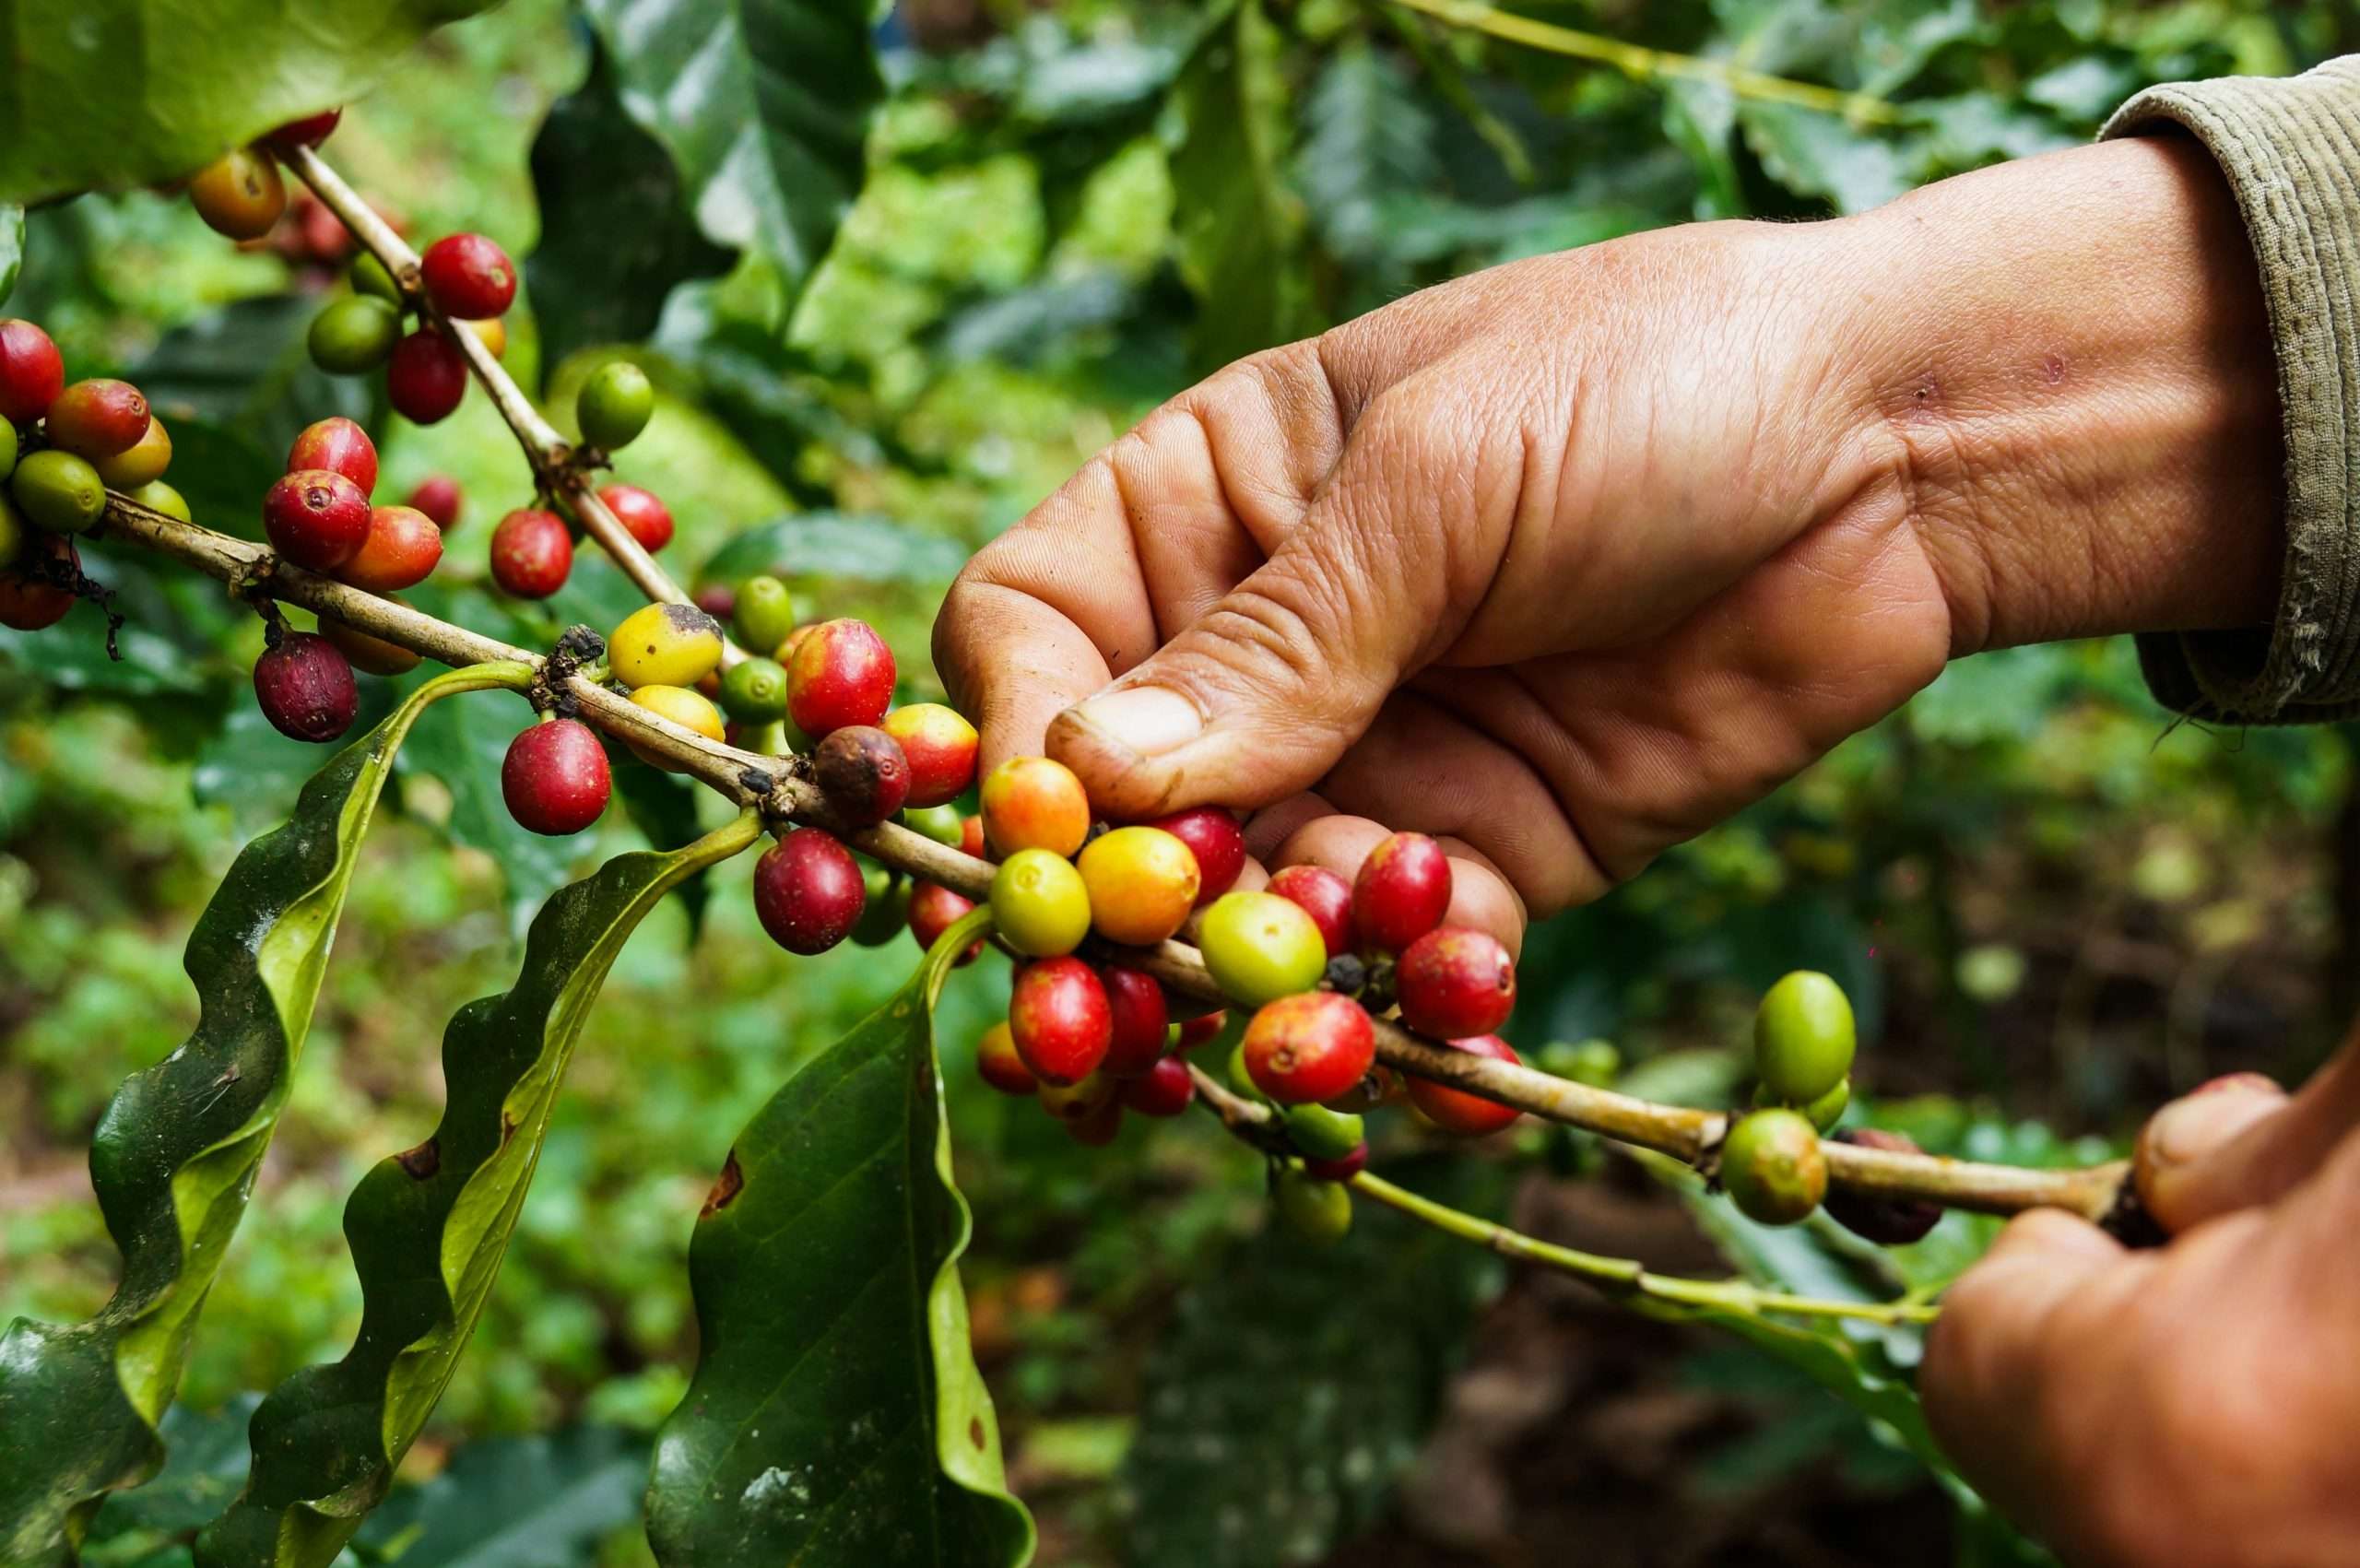 Coffee Bean Growing Conditions Affect Flavor